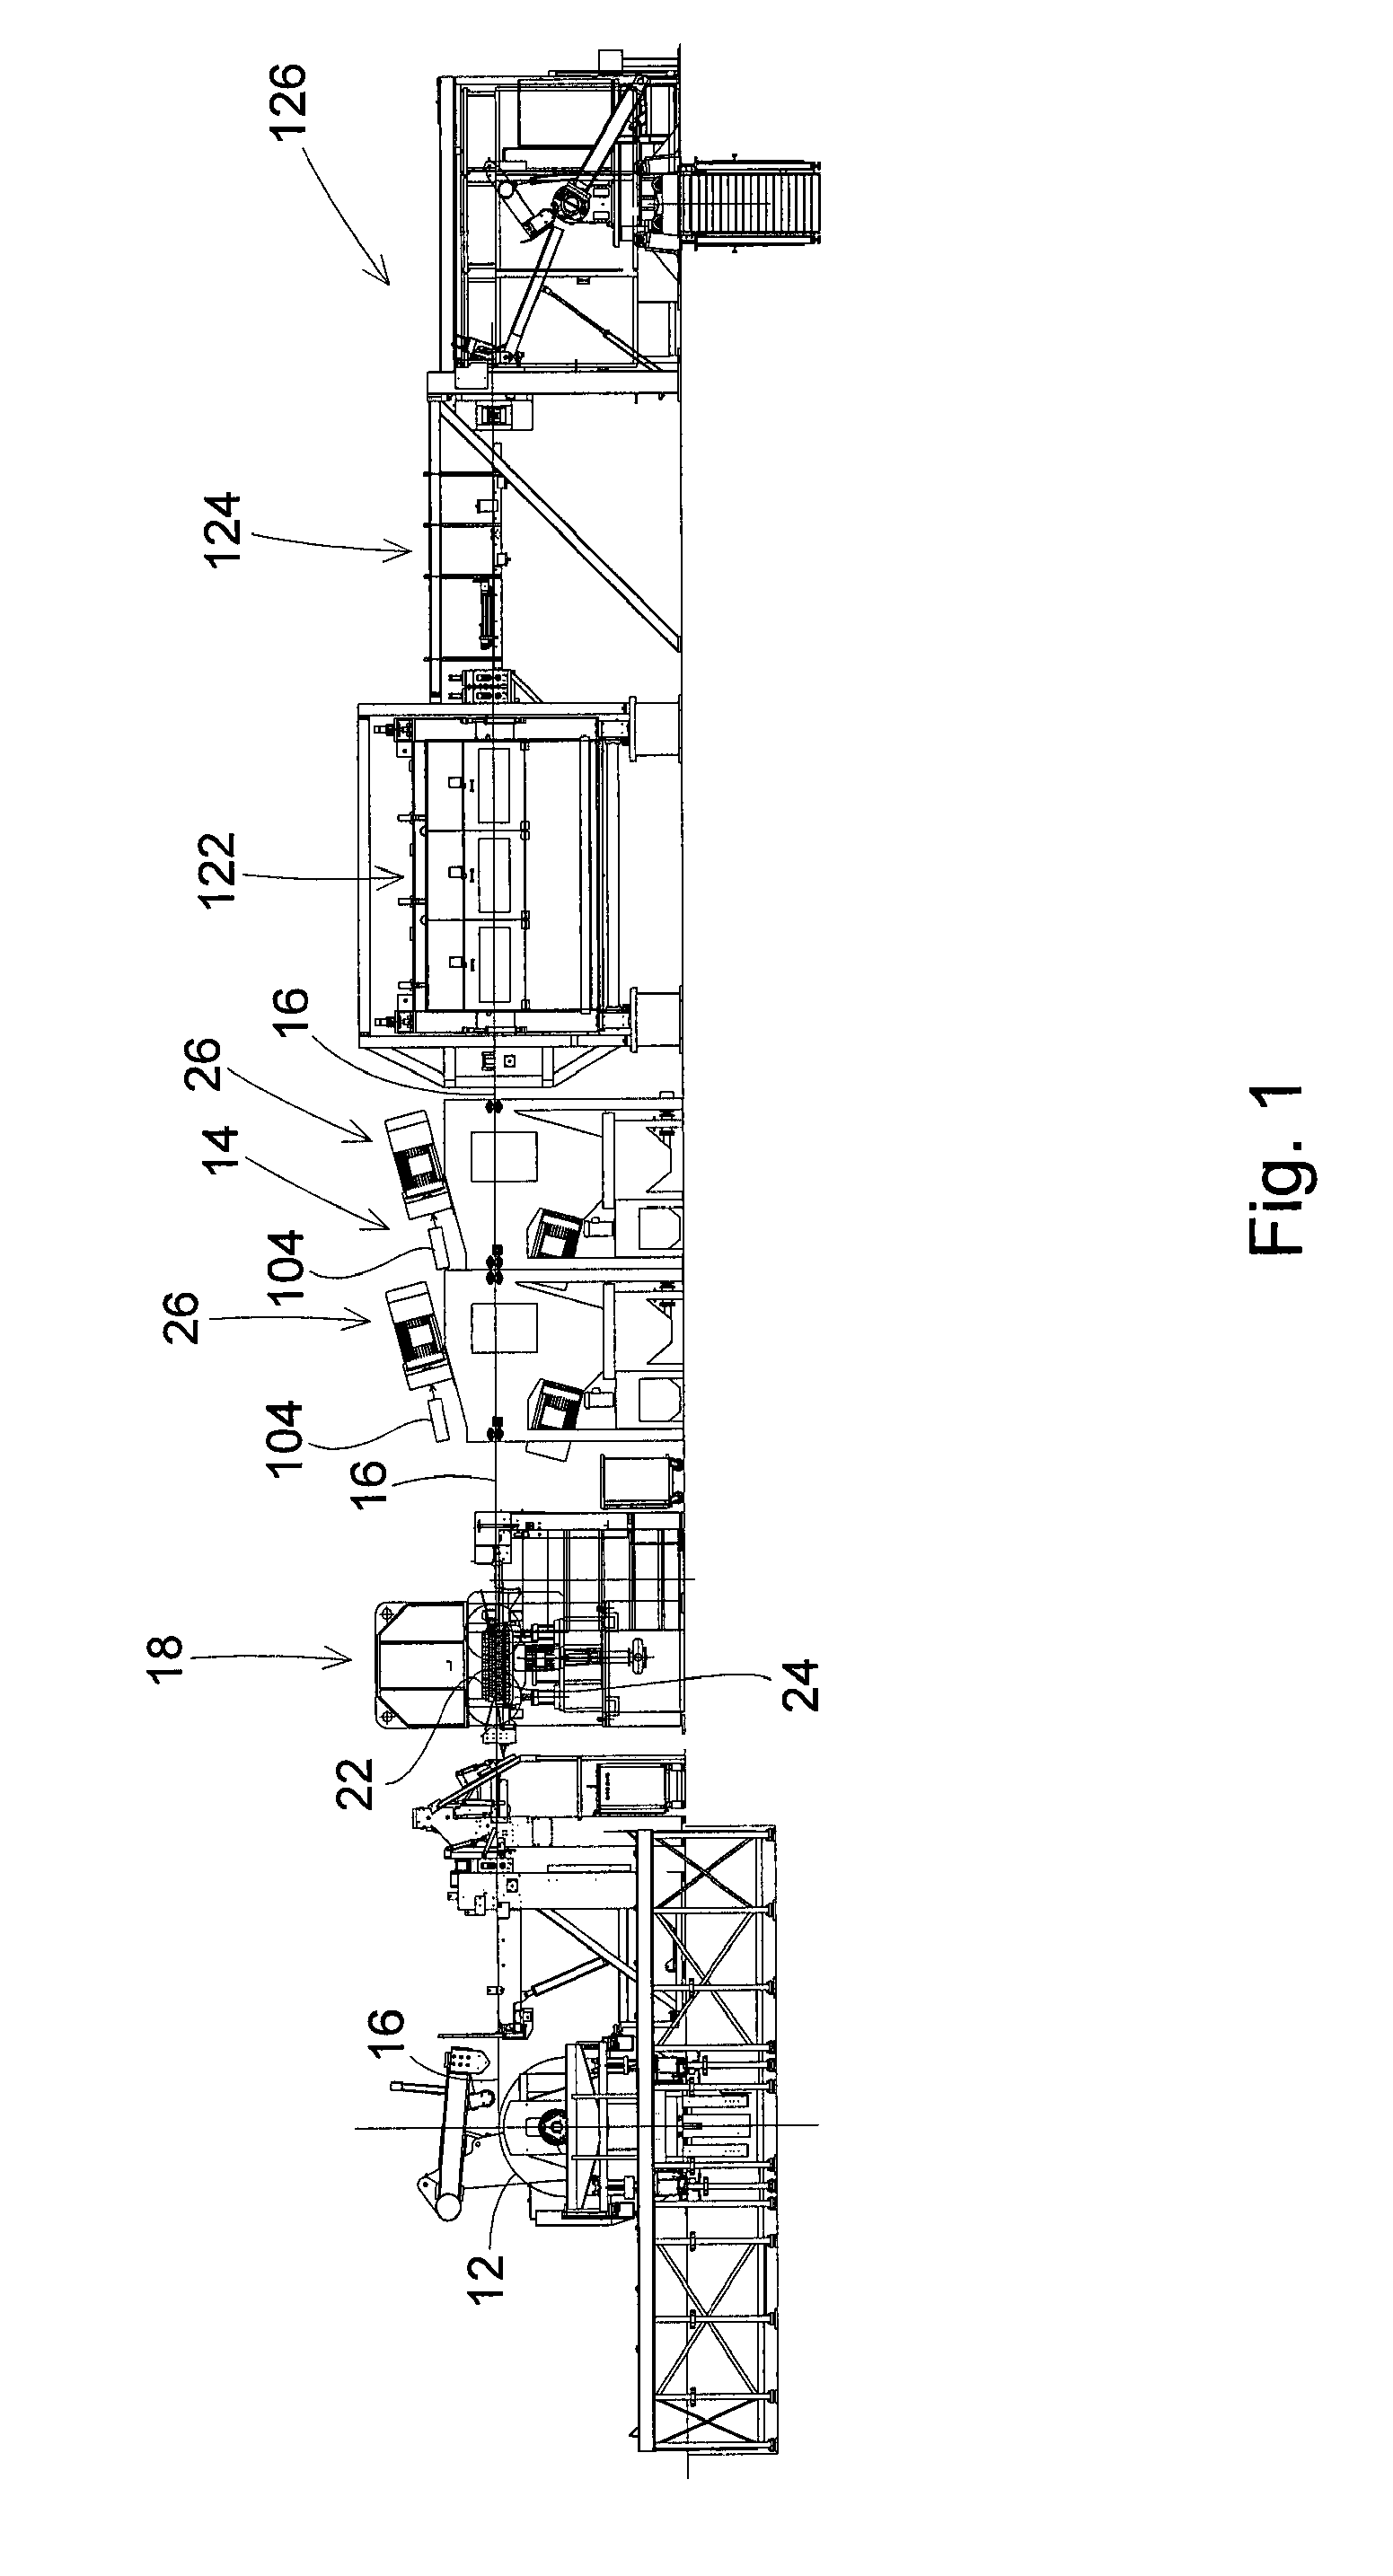 Slurry Blasting Apparatus for Removing Scale from Sheet Metal